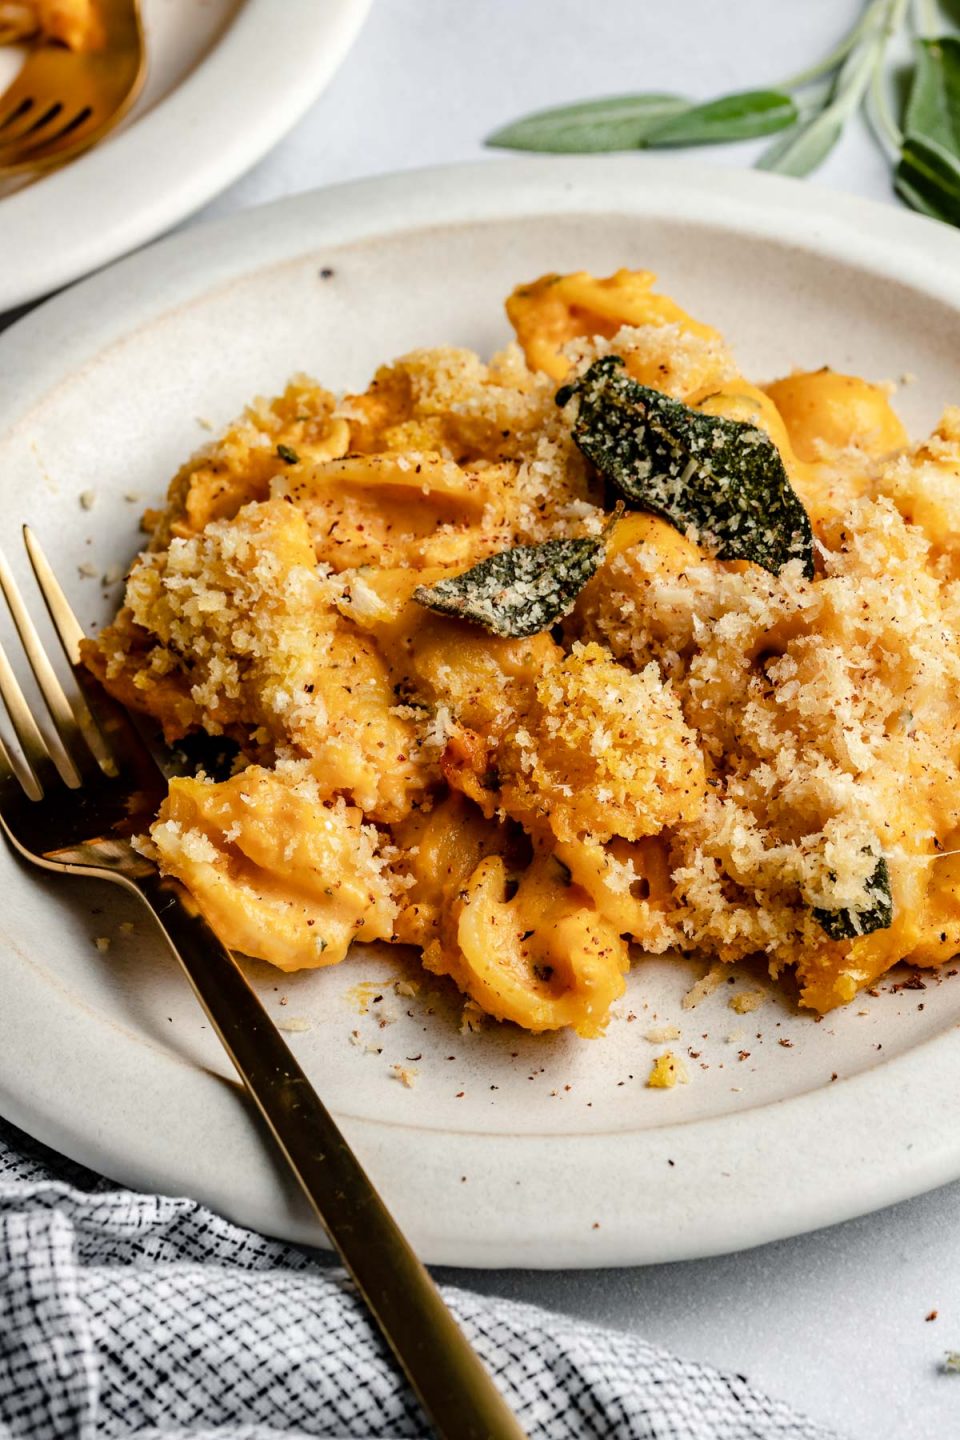 Side angle of creamy pumpkin macaroni, topped with brown butter sage breadcrumbs. The macaroni is on a ceramic white plate, next to a checkered linen & fresh sage leaves.